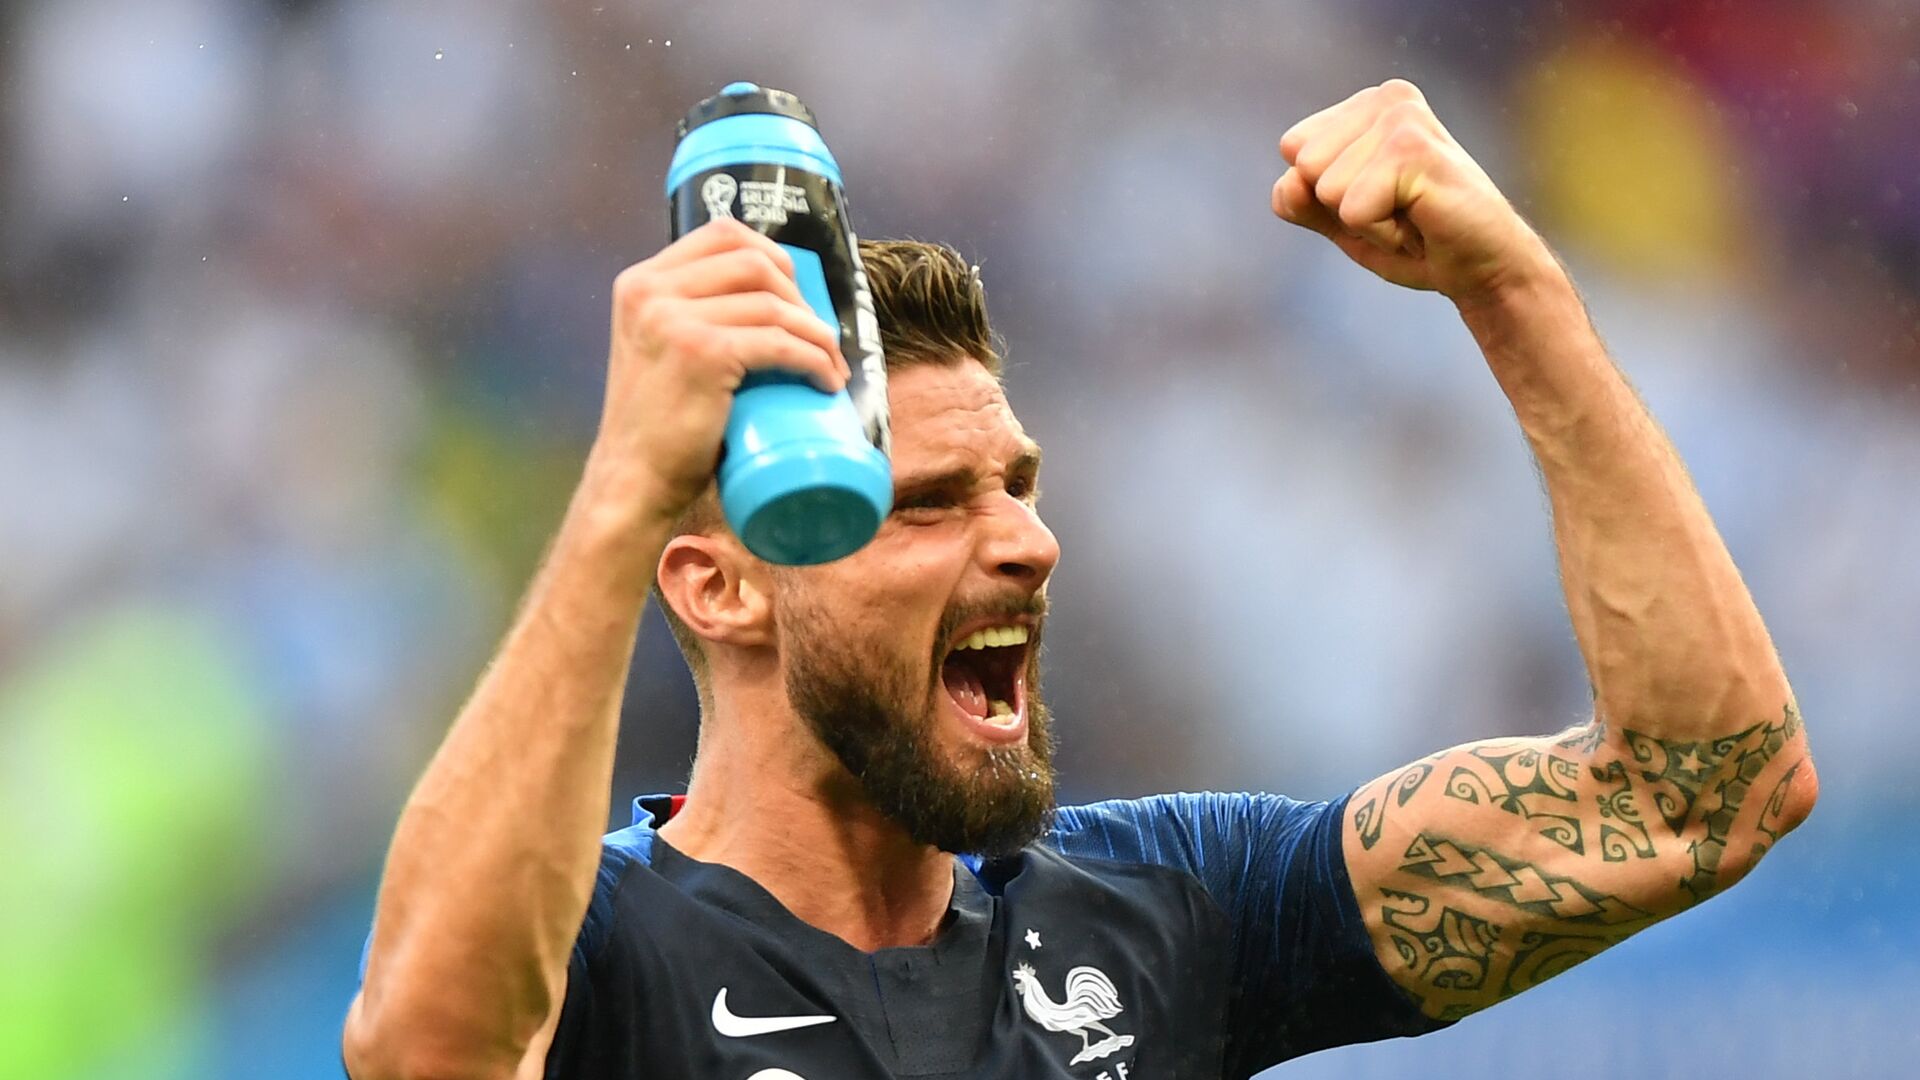 France's Olivier Giroud celebrates his team's 4-3 victory at the World Cup Round of 16 soccer match between France and Argentina at the Kazan Arena, in Kazan, Russia, June 30, 2018 - اسپوتنیک افغانستان  , 1920, 07.07.2022